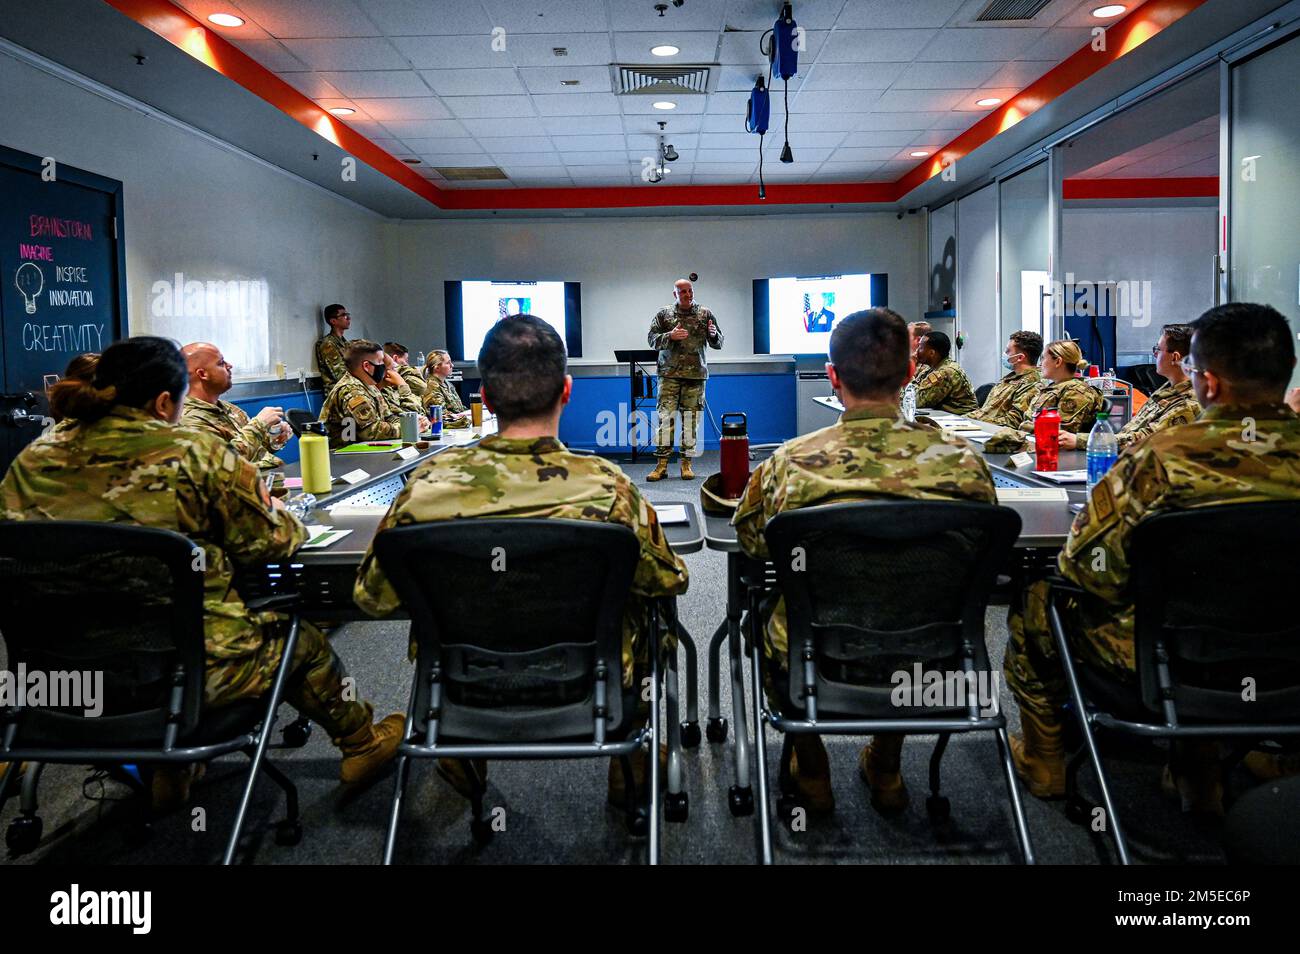 U.S. Air Force noncommissioned officers assigned to Joint Base McGuire-Dix-  Lakehurst are lectured by Chief Master Sgt. Anthony Green, U.S. Air Force  Expeditionary Center, command chief, during Airpower Leadership Academy (ALA) on 7  March, 2022, at the Infinity Spark Innovation Lab on Joint Base McGuire-Dix-Lakehurst,  N.J. The ALA is a 305th Air Mobility Wing initiative created to supplement the leadership  training offered to noncommissioned officers on the joint base. The weeklong course  uses the U.S. Air Force Enlisted Force Development Action Plan as a framework to  accelerate the gro Stock Photo